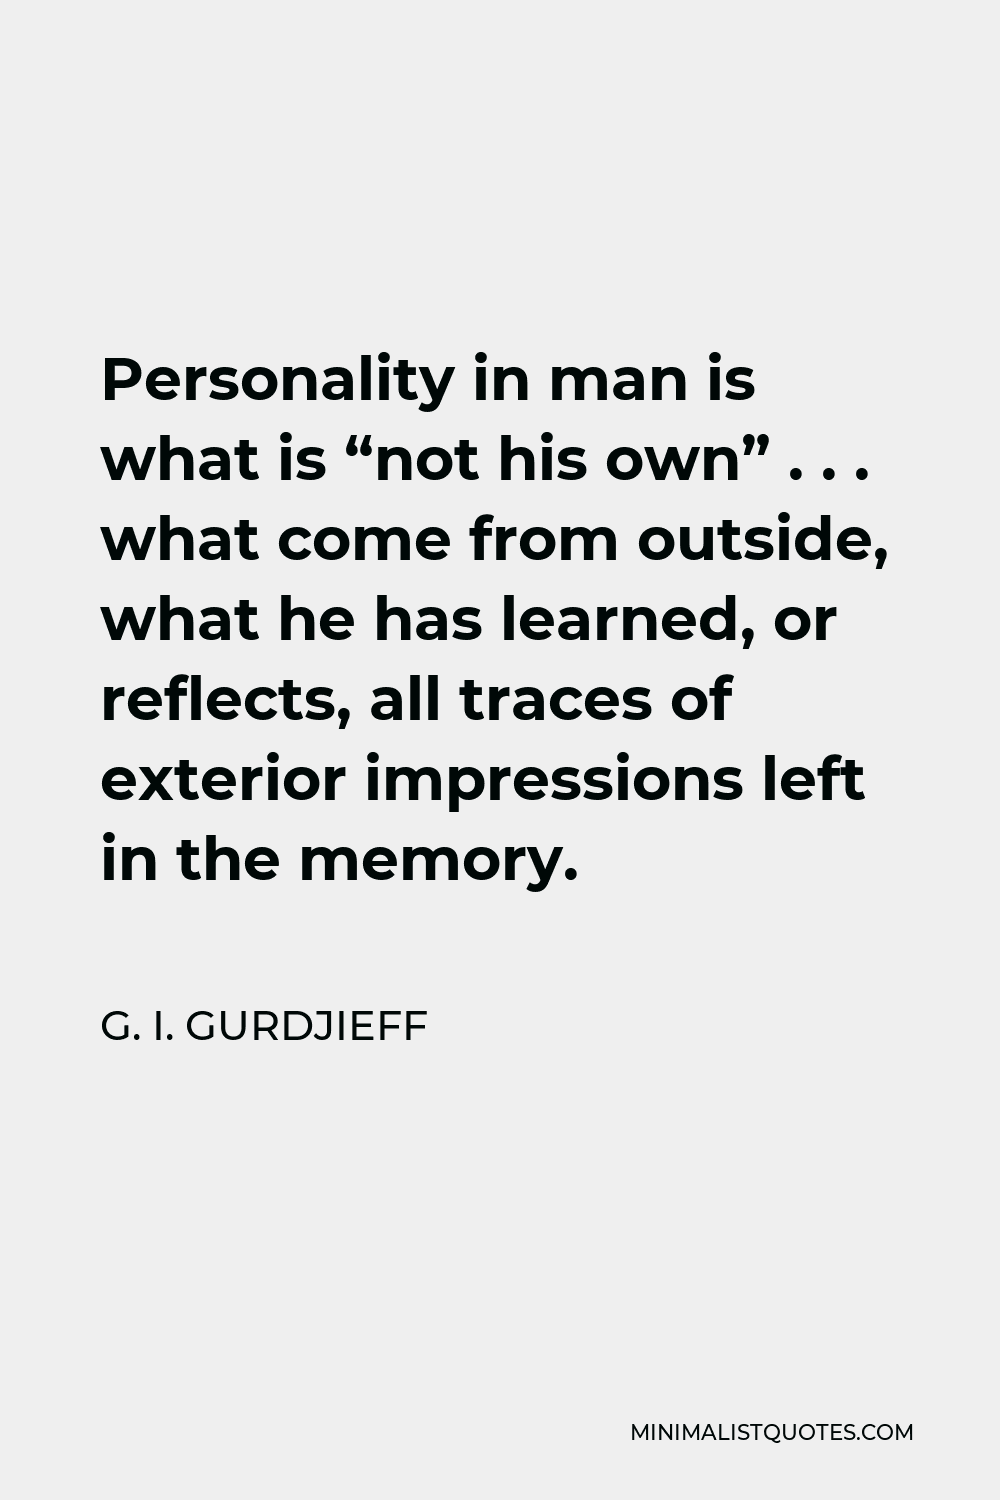 G. I. Gurdjieff Quote - Personality in man is what is “not his own” . . . what come from outside, what he has learned, or reflects, all traces of exterior impressions left in the memory.